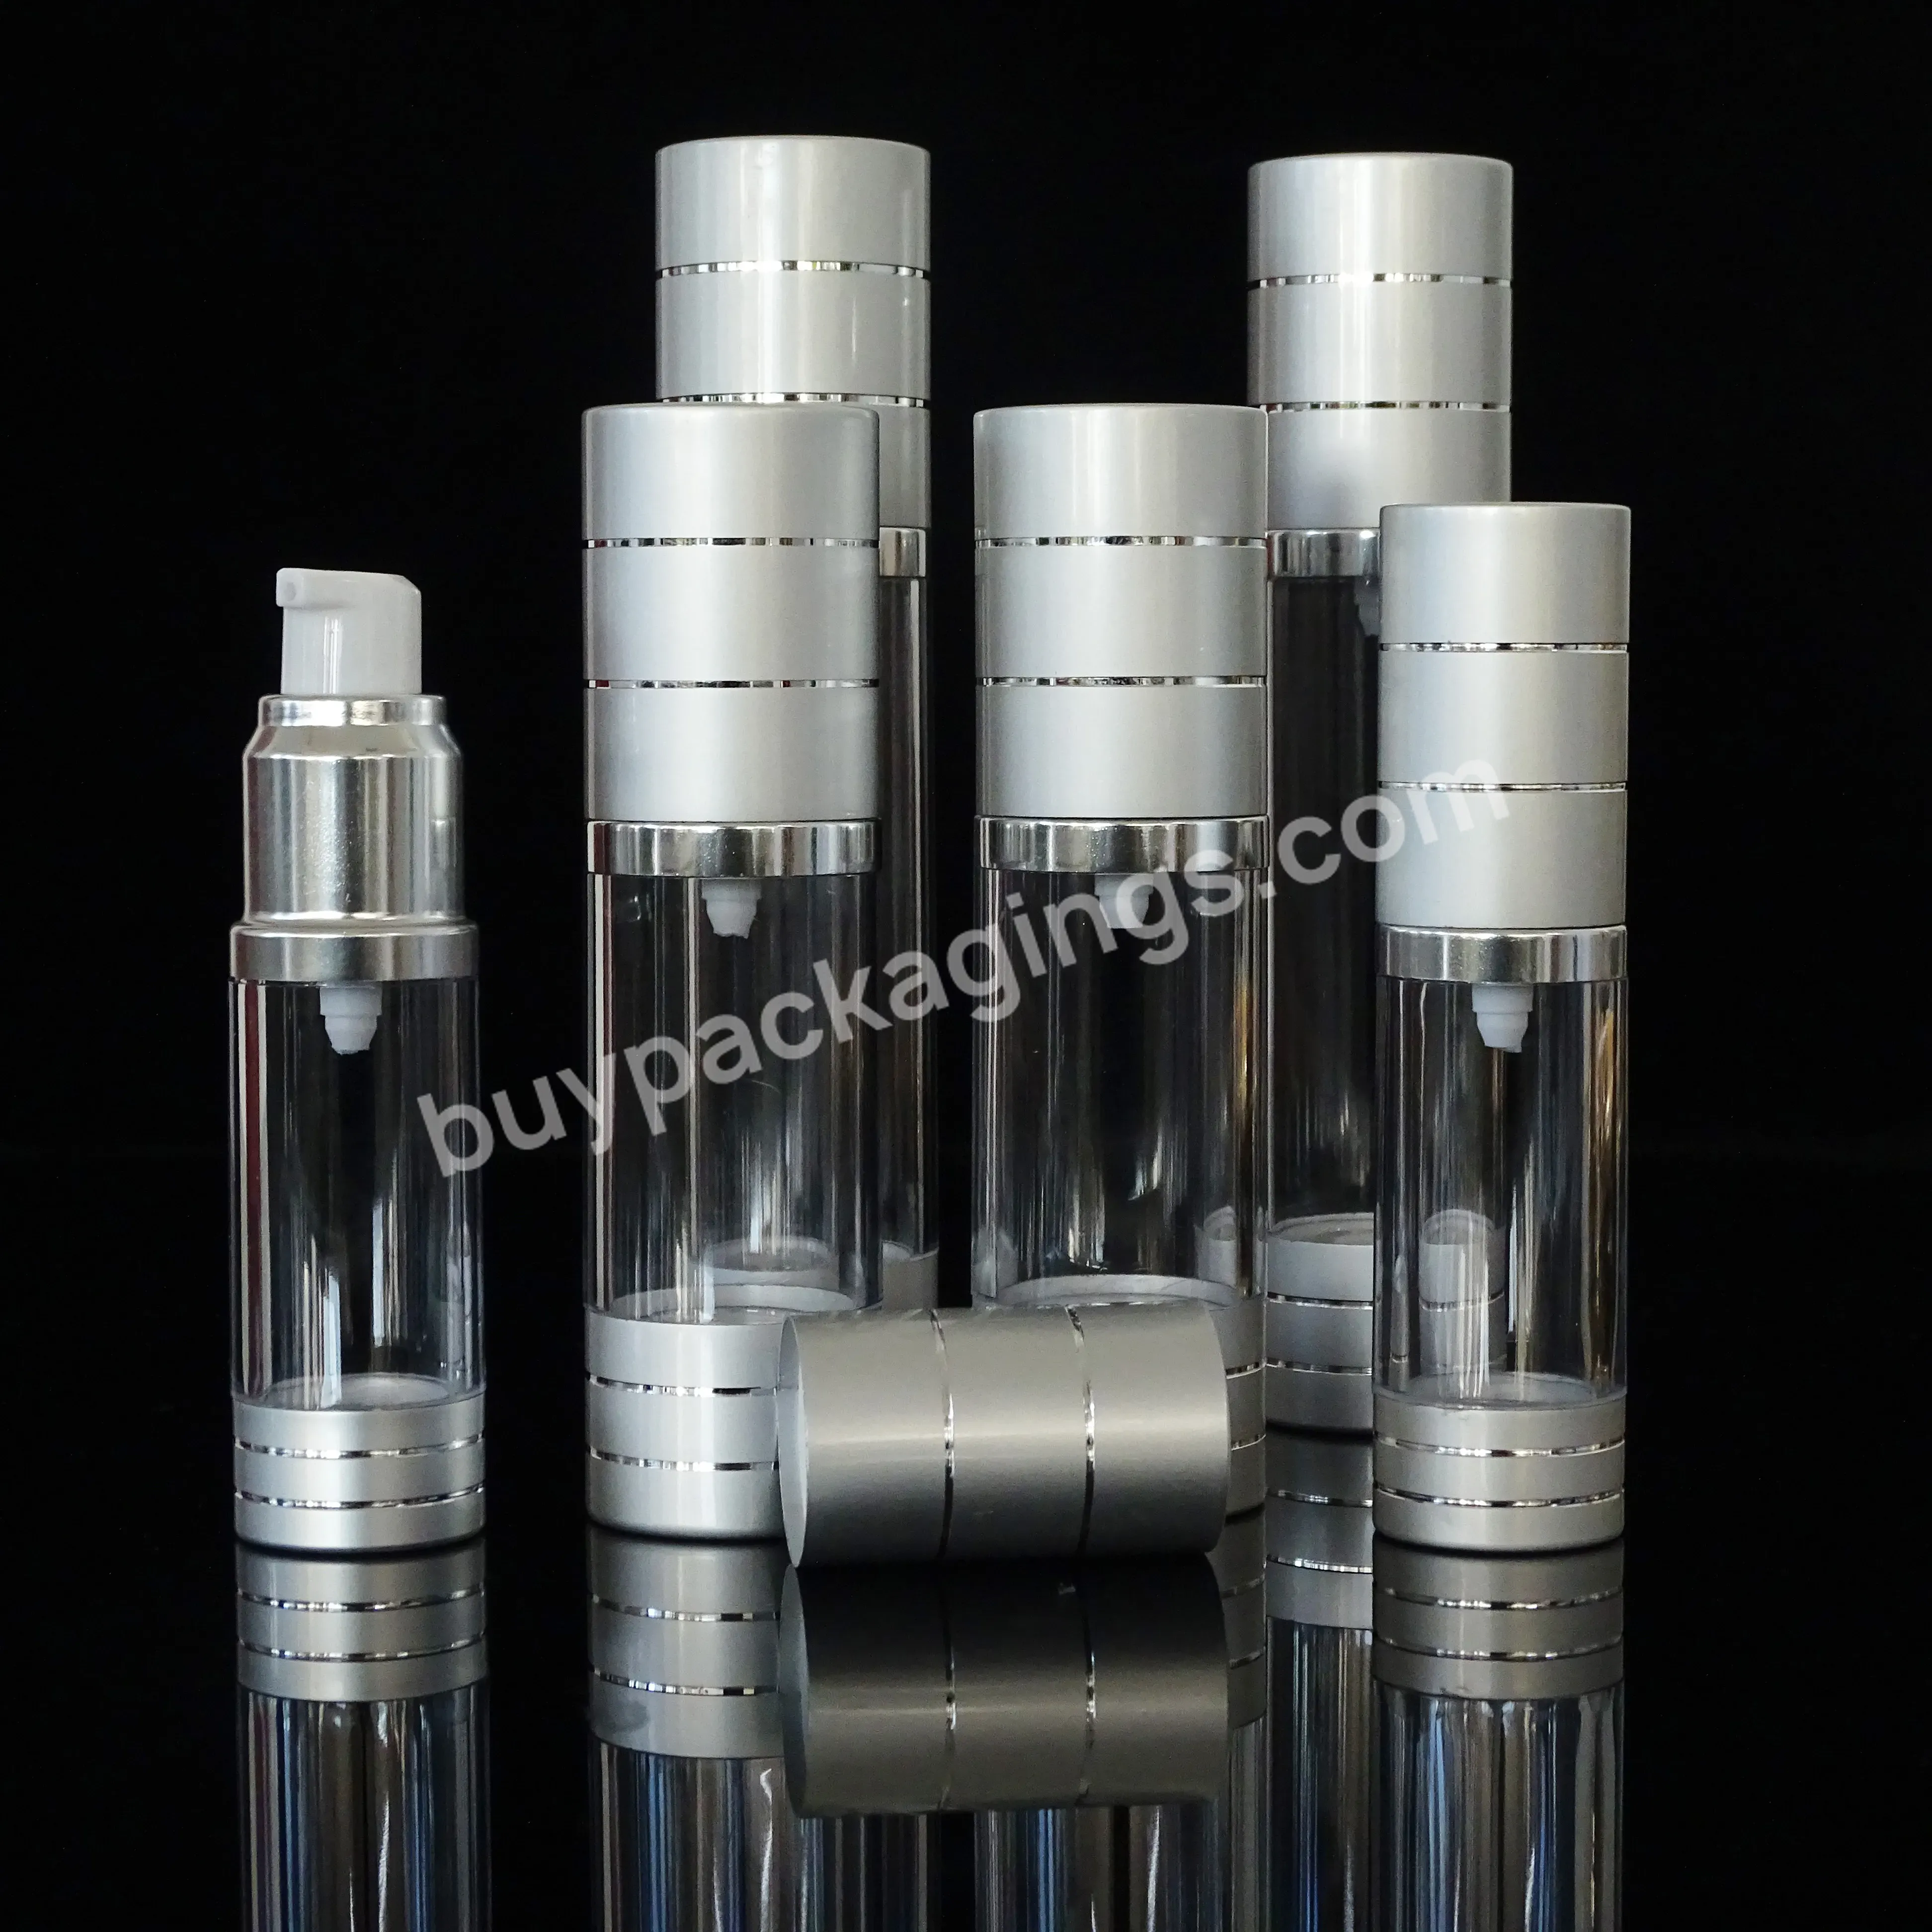 China Supplier Professional Metalized Cosmetic Packaging Aluminum Airless Shiny Gold Spray Bottle - Buy Airless Bottle Gold Metalized,Professional Airless Pump Bottle,Aluminum Airless Bottle.